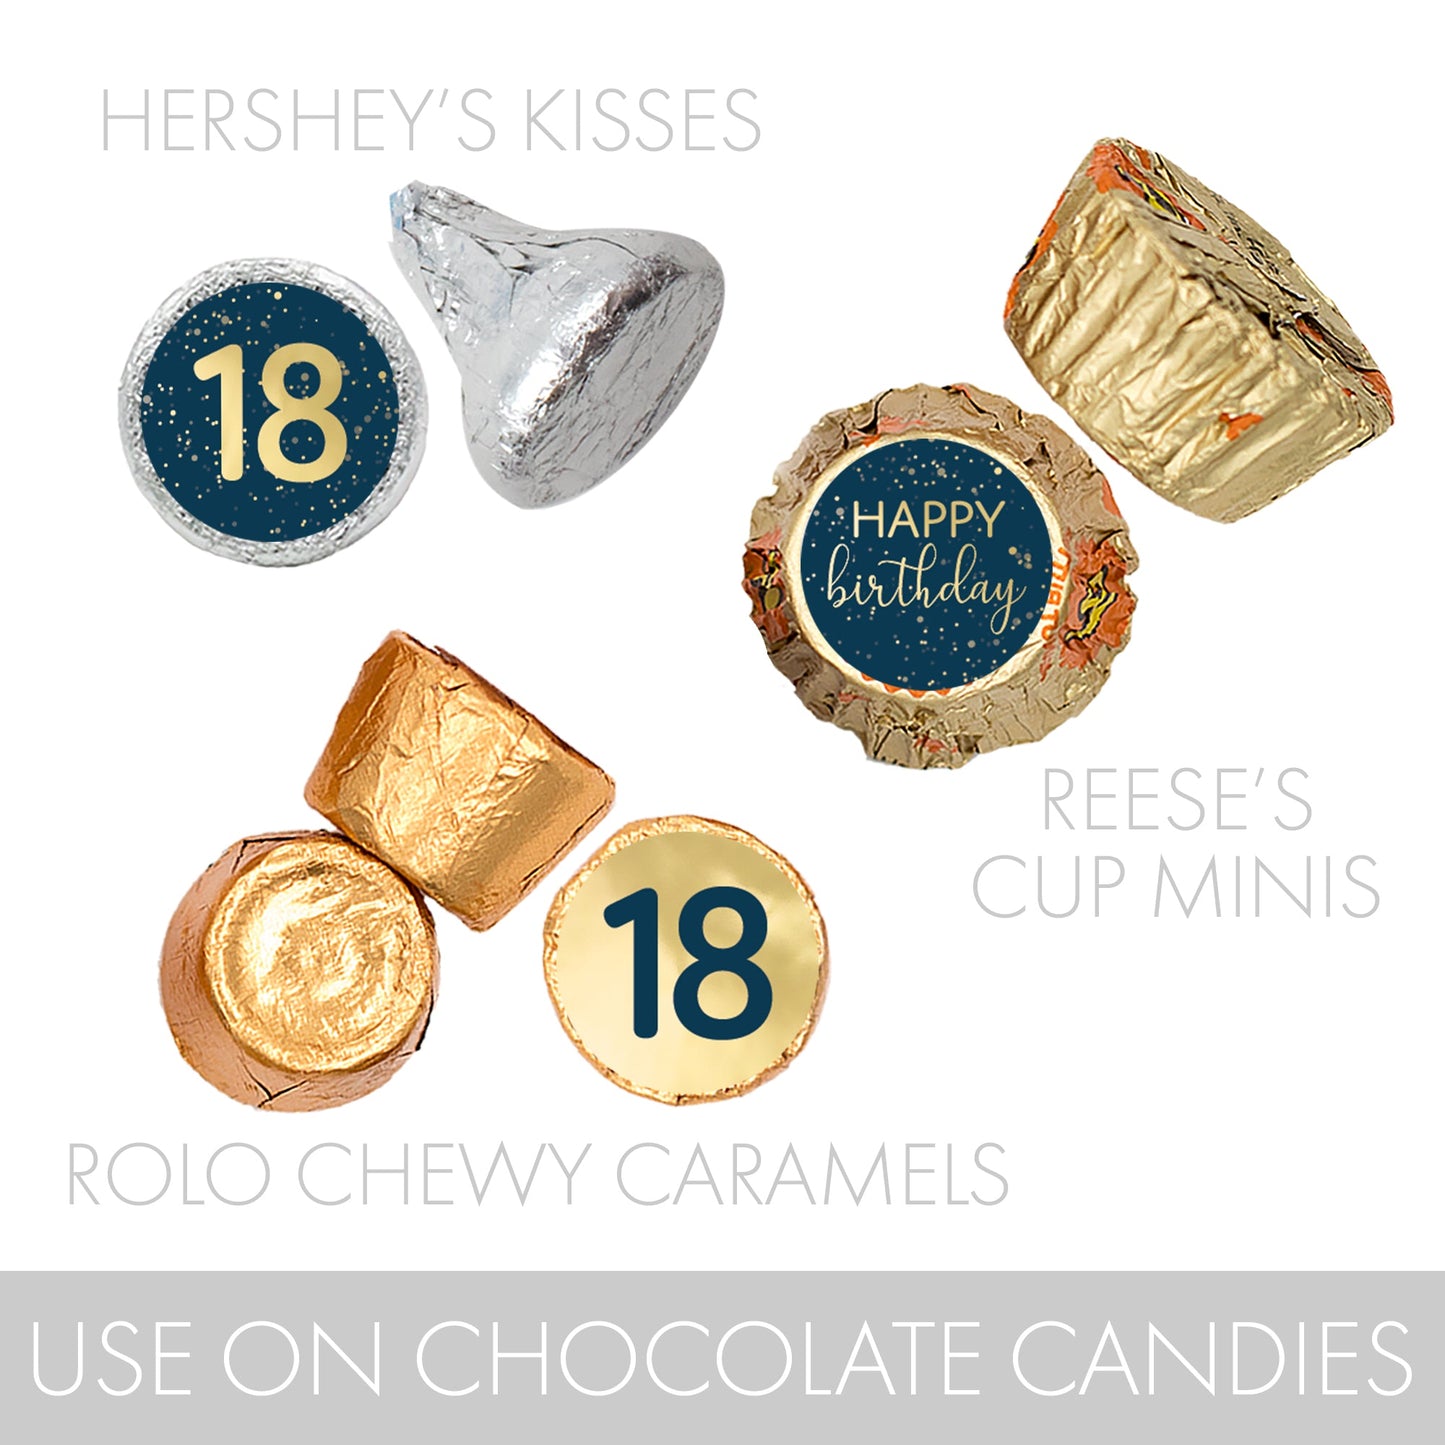 Celebrate your 100th birthday in style with these matching Hershey's Kisses stickers